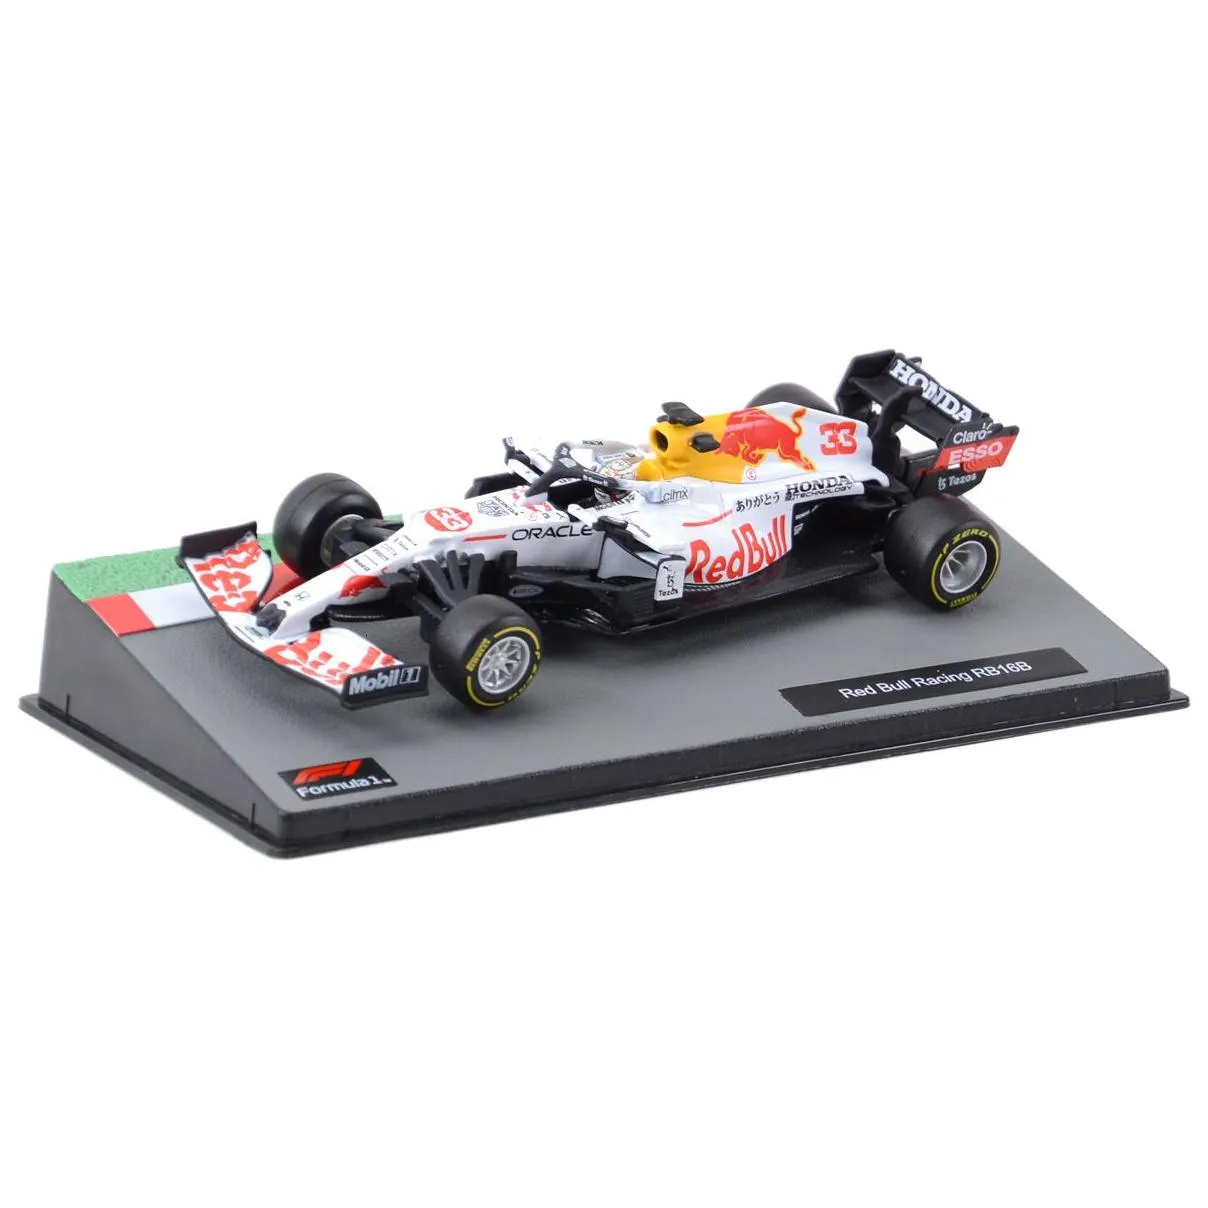 diecast model bburago 1 43 redbell rb16b 11 33 turkey formula car static die cast vehicles collectible racing toys 230821